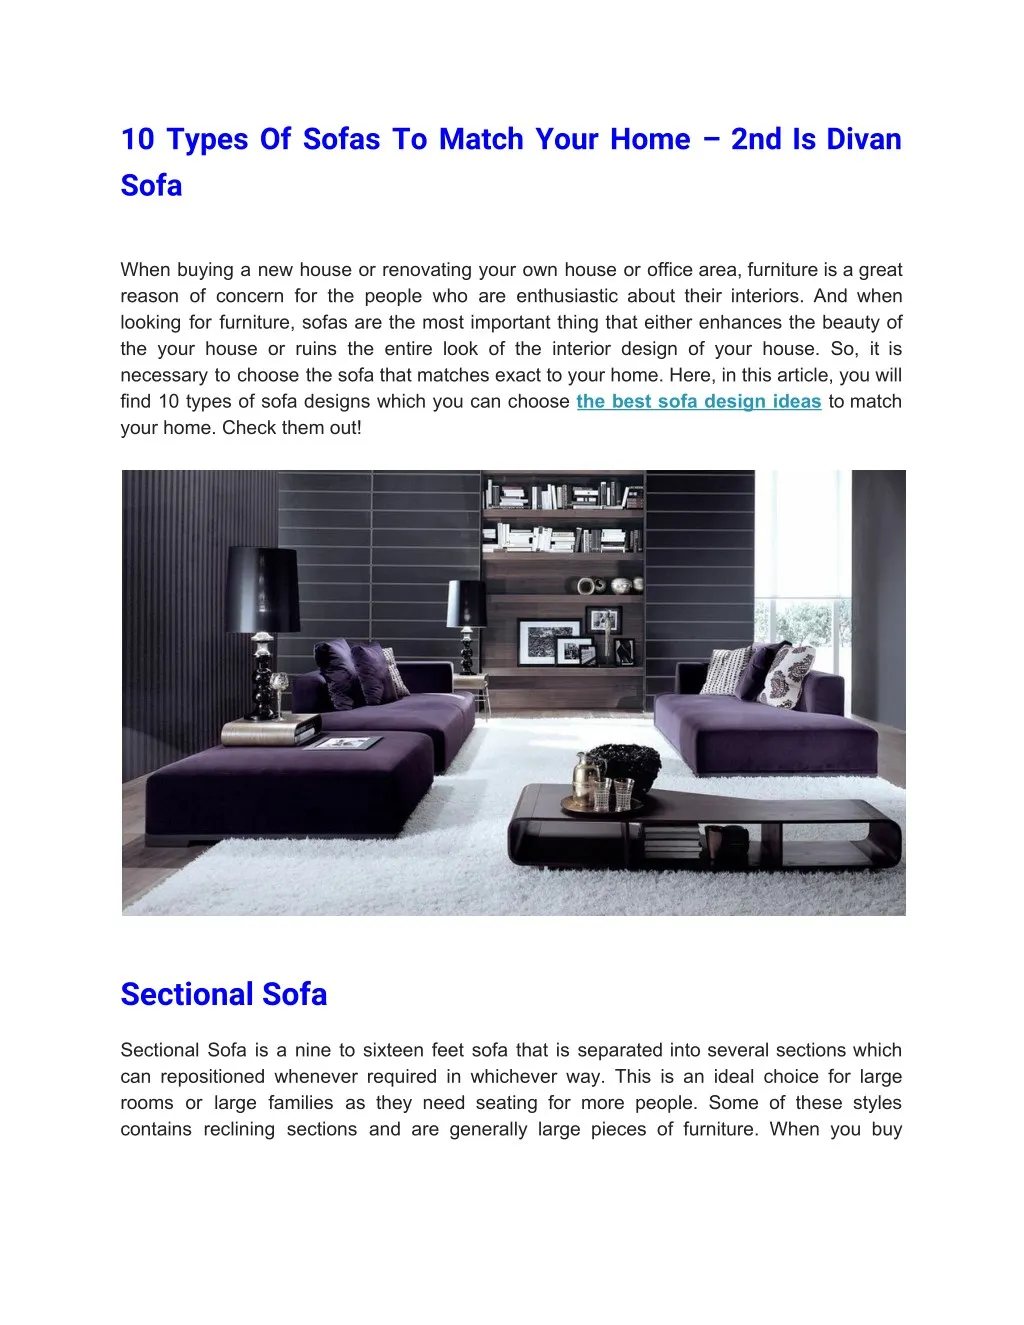 10 types of sofas to match your home 2nd is divan